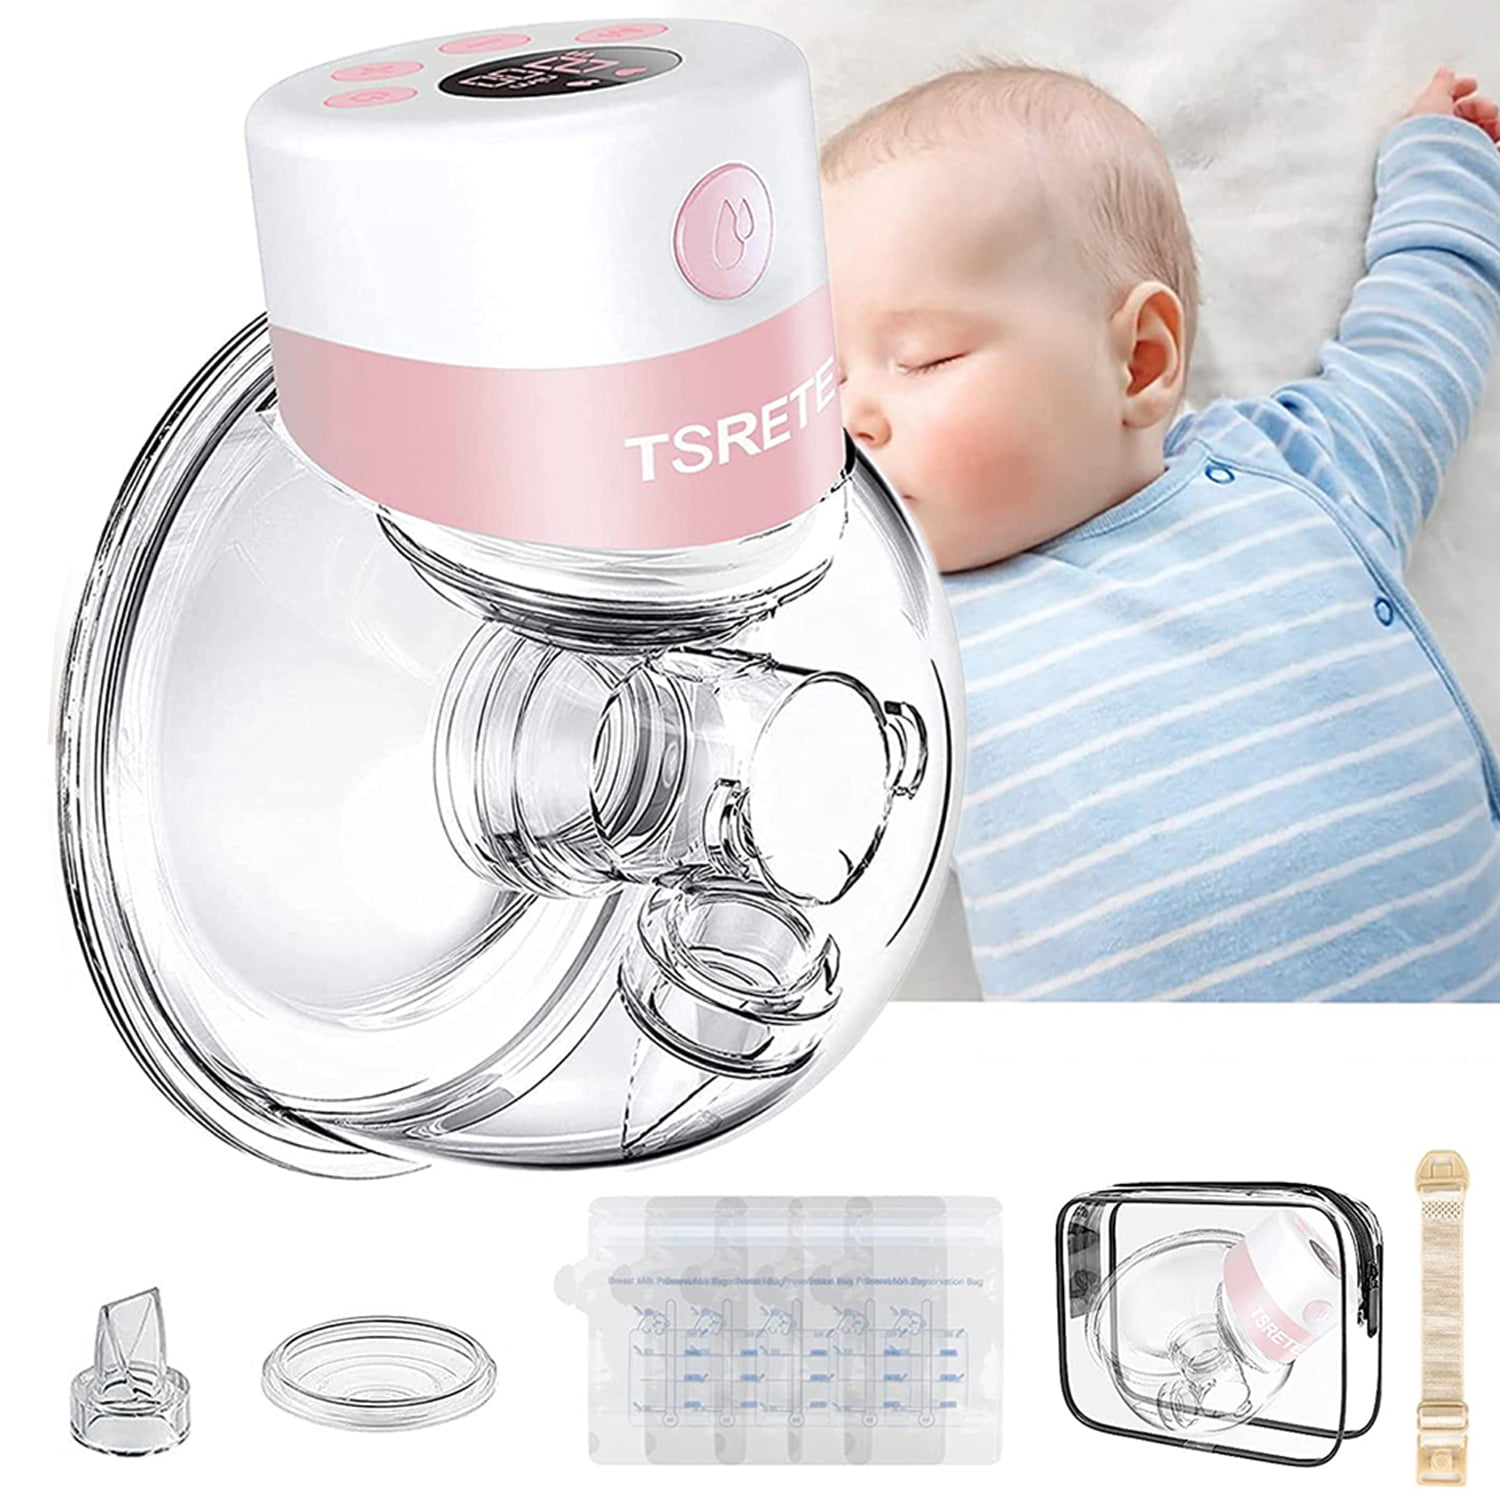 Wearable Breast Pump Memory Function Rechargeable Single Milk Extractor with Massage Mode-27mm Flange-Green with 2 Modes LCD Display Hands Free Breast Pump 9 Levels TSRETE Breast Pump Electric 